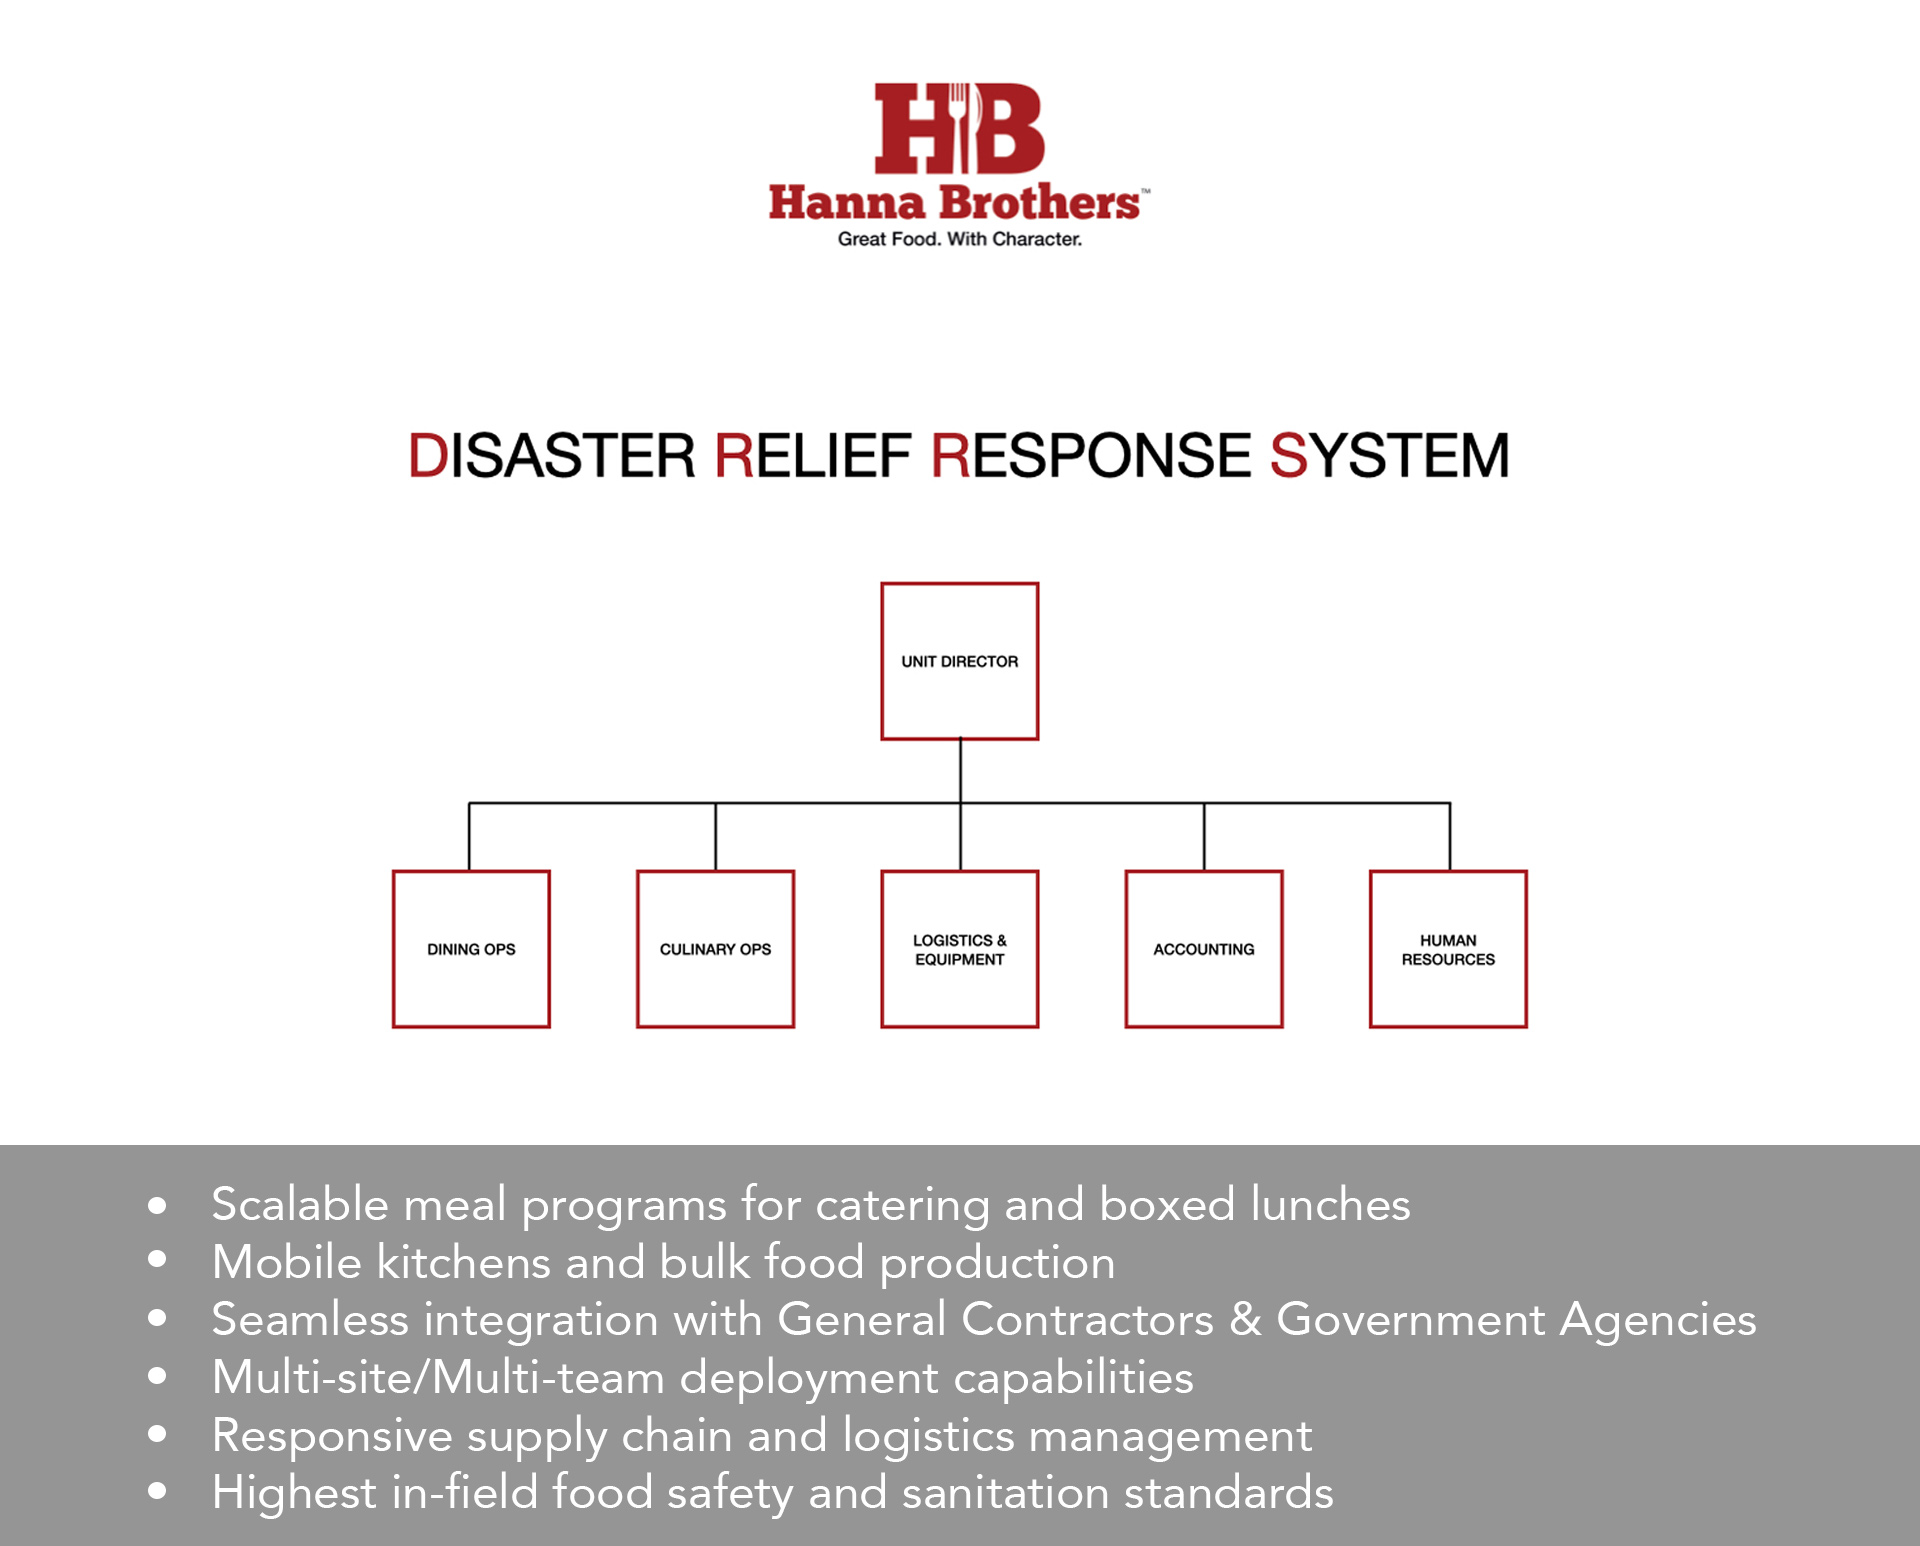 Hanna Brothers Disaster Relief Response System Catering and Boxed lunches emergency meals